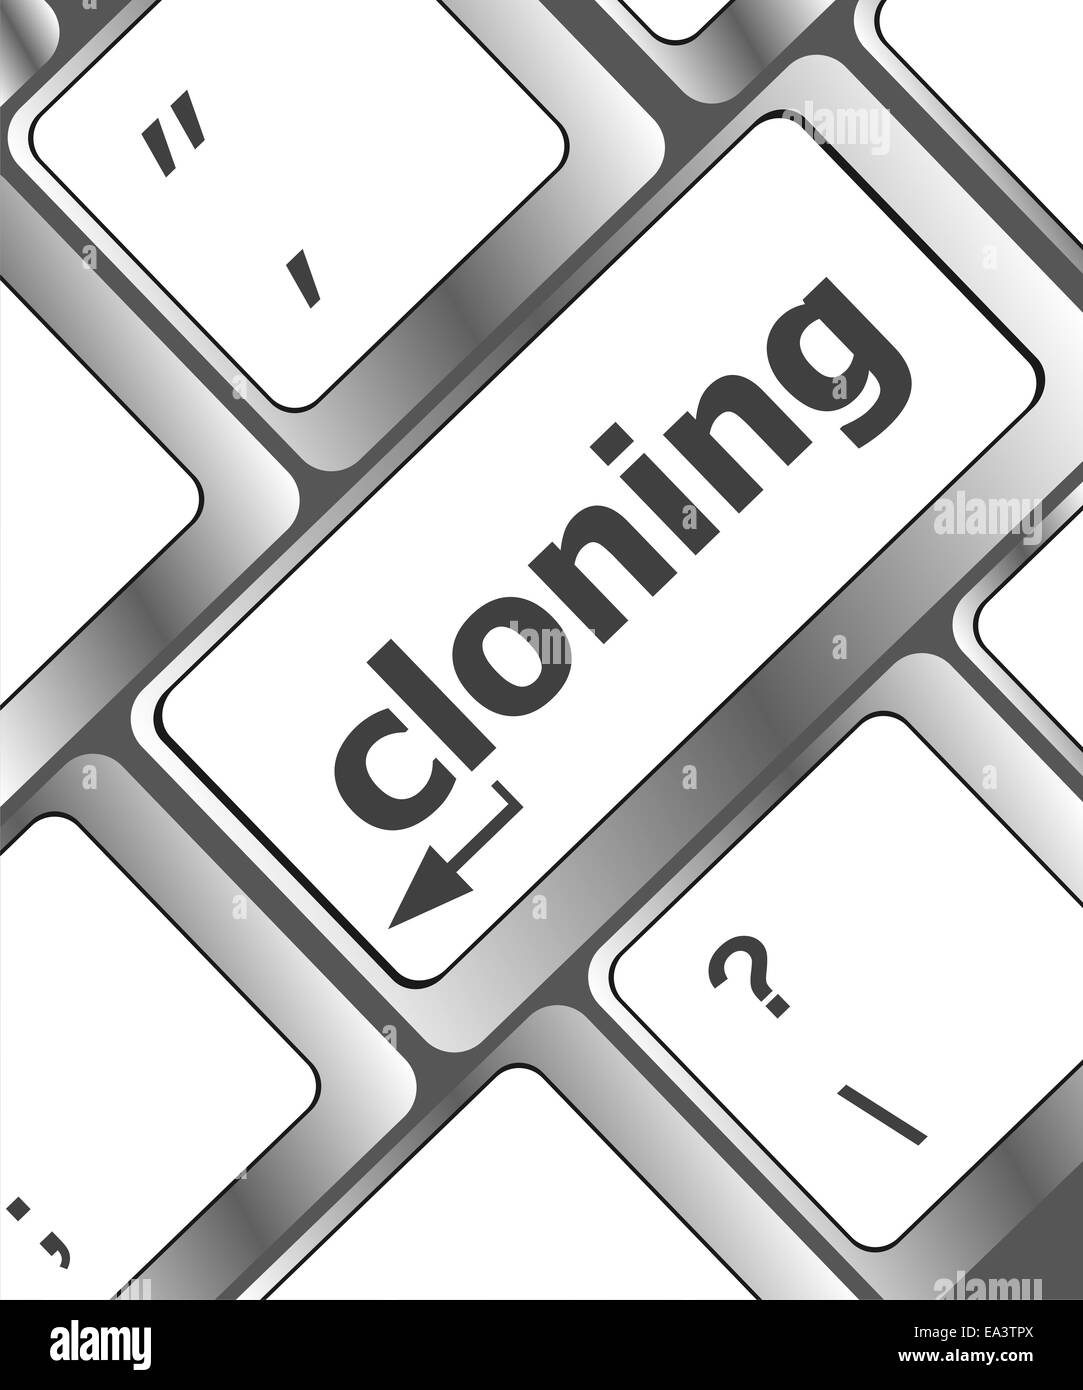 cloning keyboard button on computer pc Stock Photo